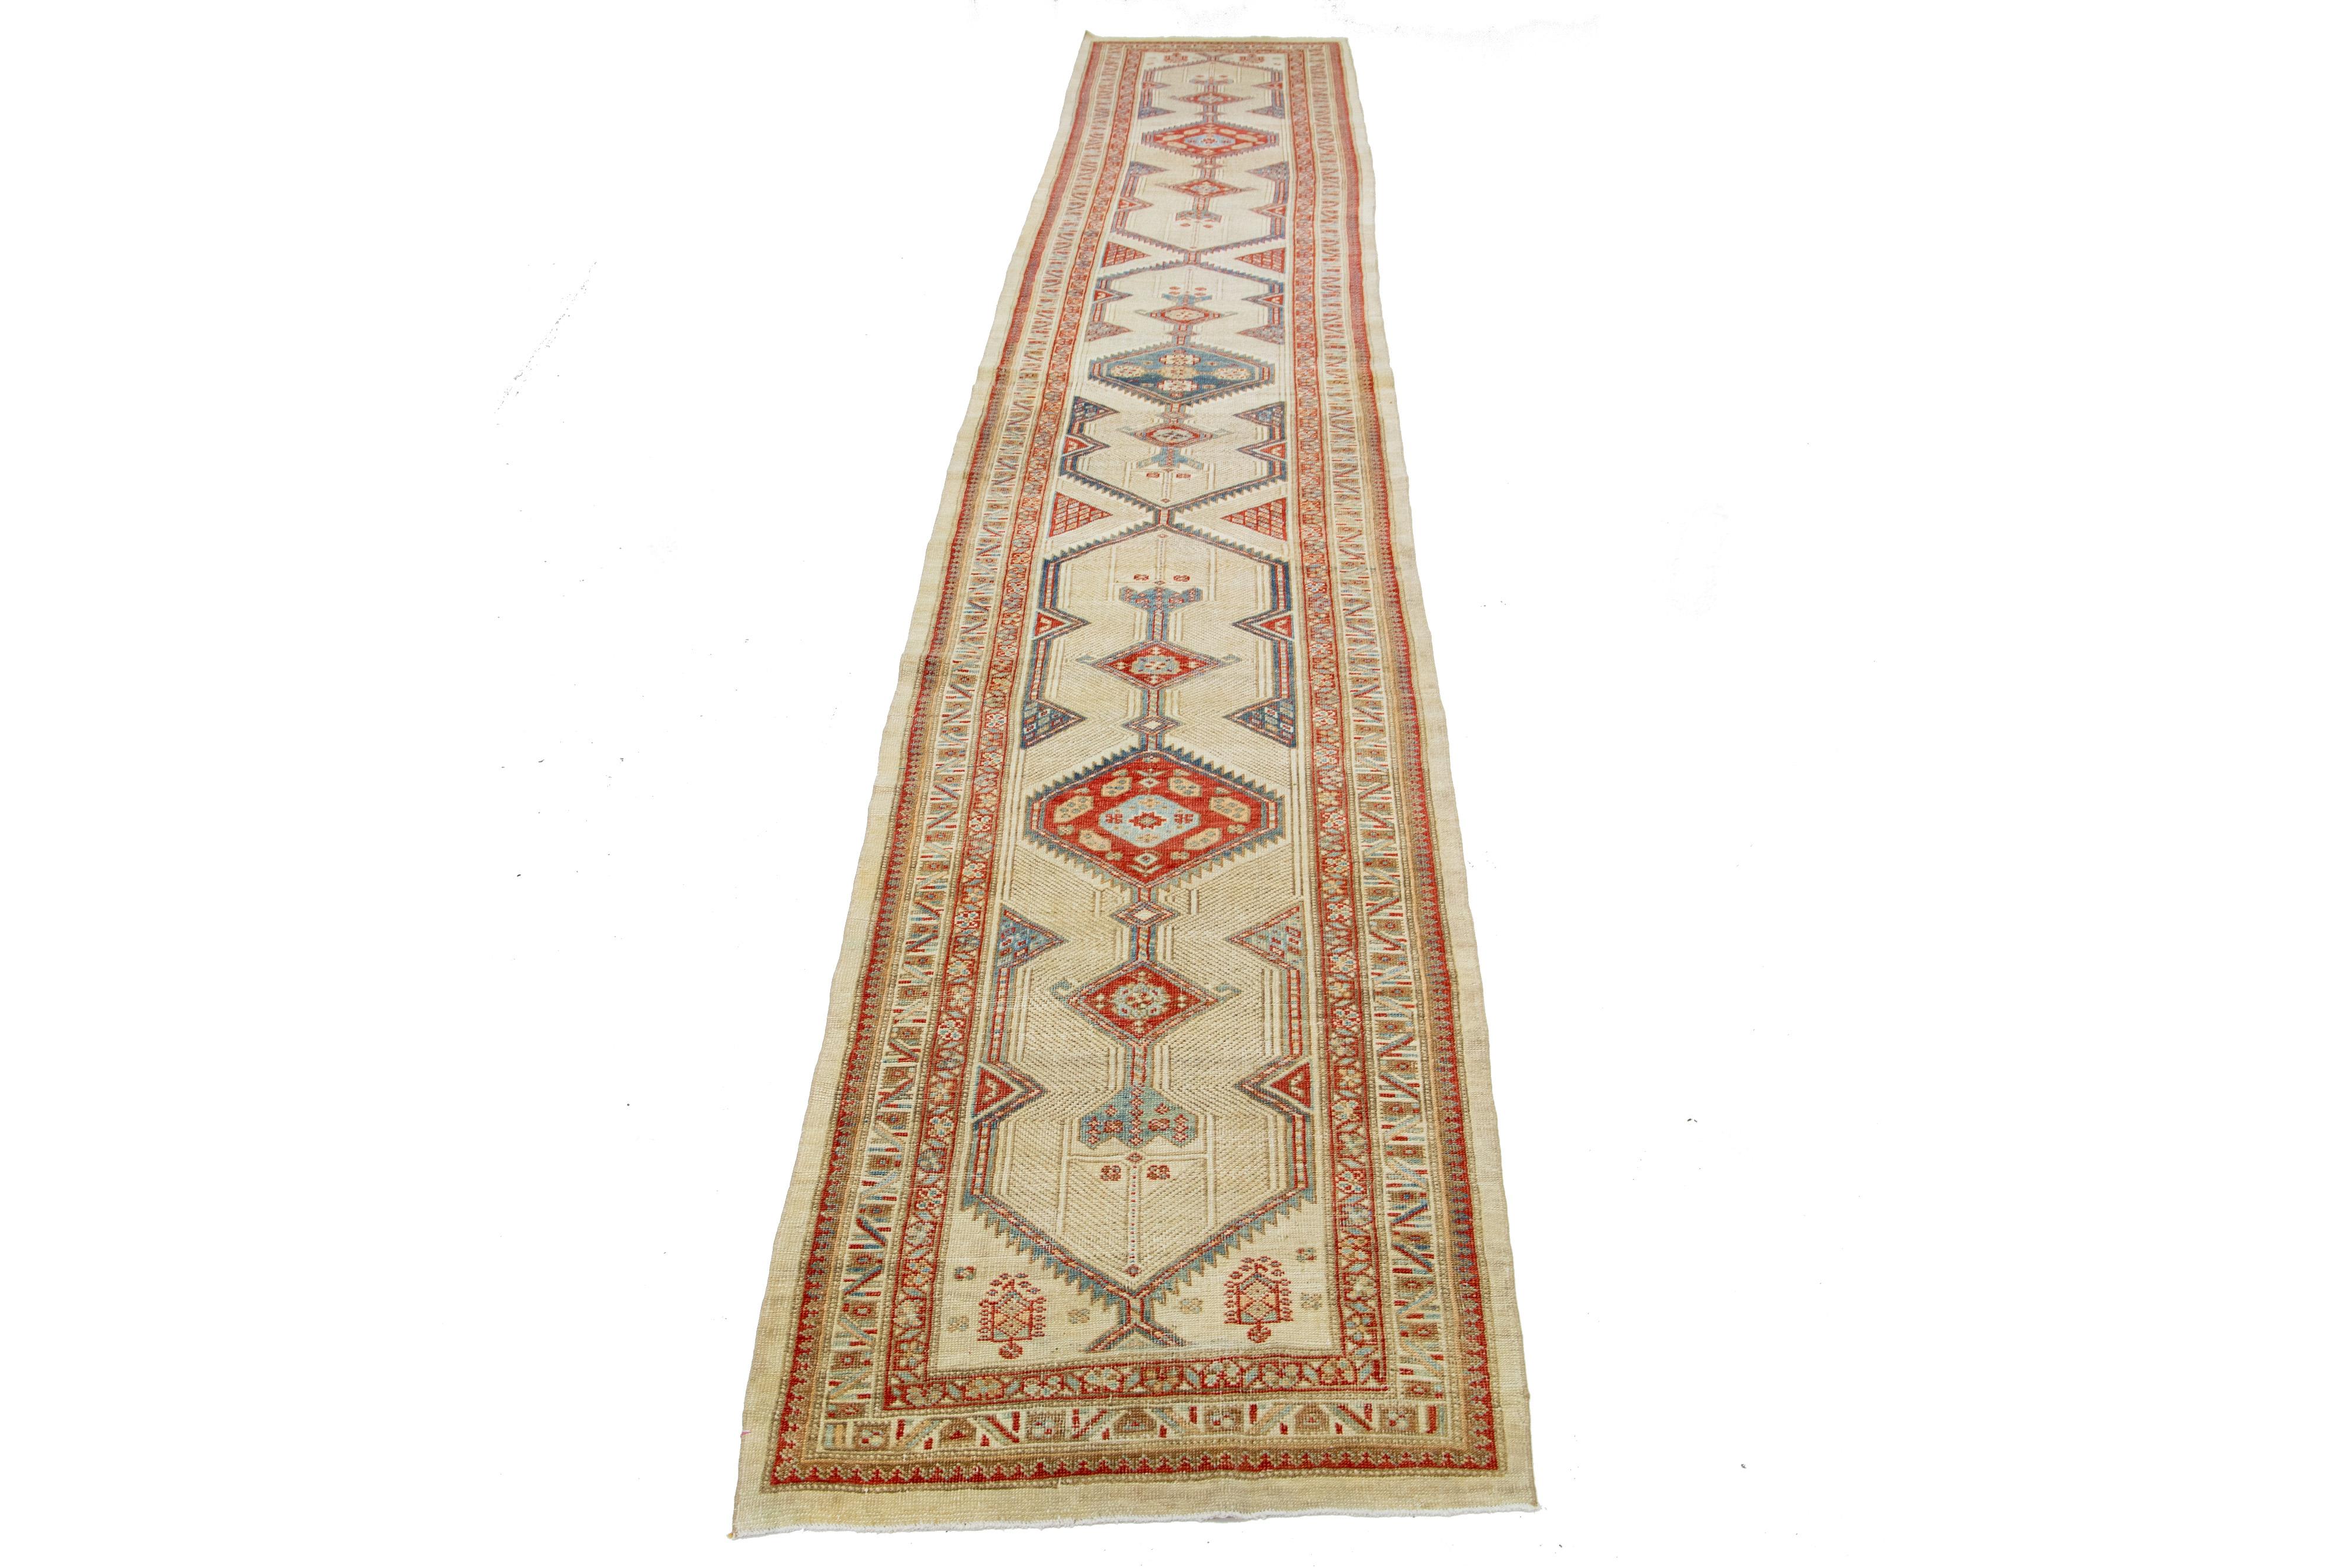 Antique Persian Serab hand-knotted wool runner with beige-cream color field. This piece has rust and blue accents in an all-over tribal design. 

This rug measures 3' x 18'4